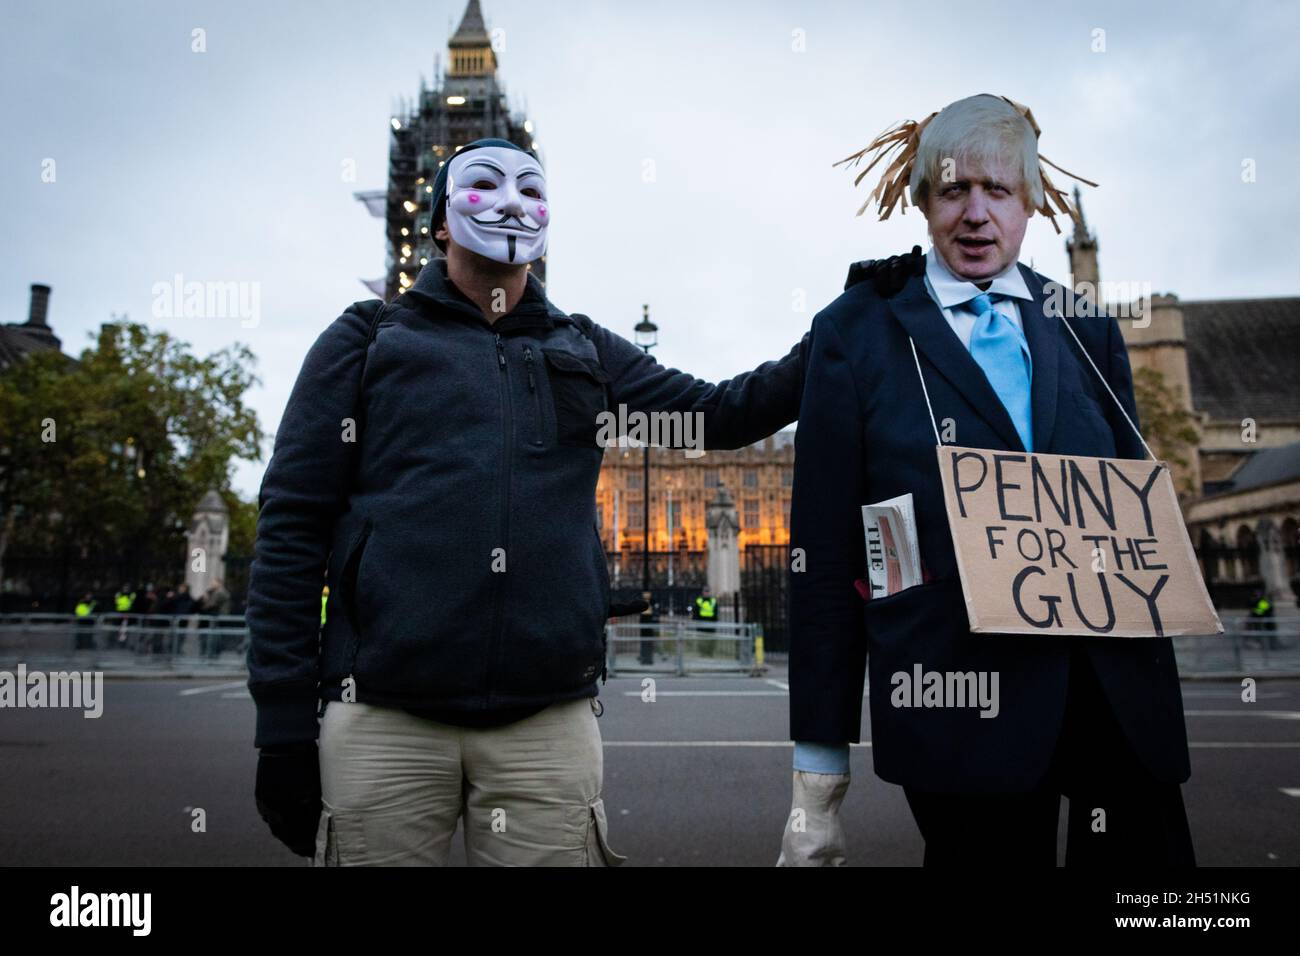 London, UK. 05th Nov, 2021. A person dressed up with an Anonymous mask on stands in front of the Houses of Parliament for the annual Million Mask march through the city. The Anonymous movement stands in solidarity for a society which is marginalised by the political elite and associated corporations. Credit: Andy Barton/Alamy Live News Stock Photo